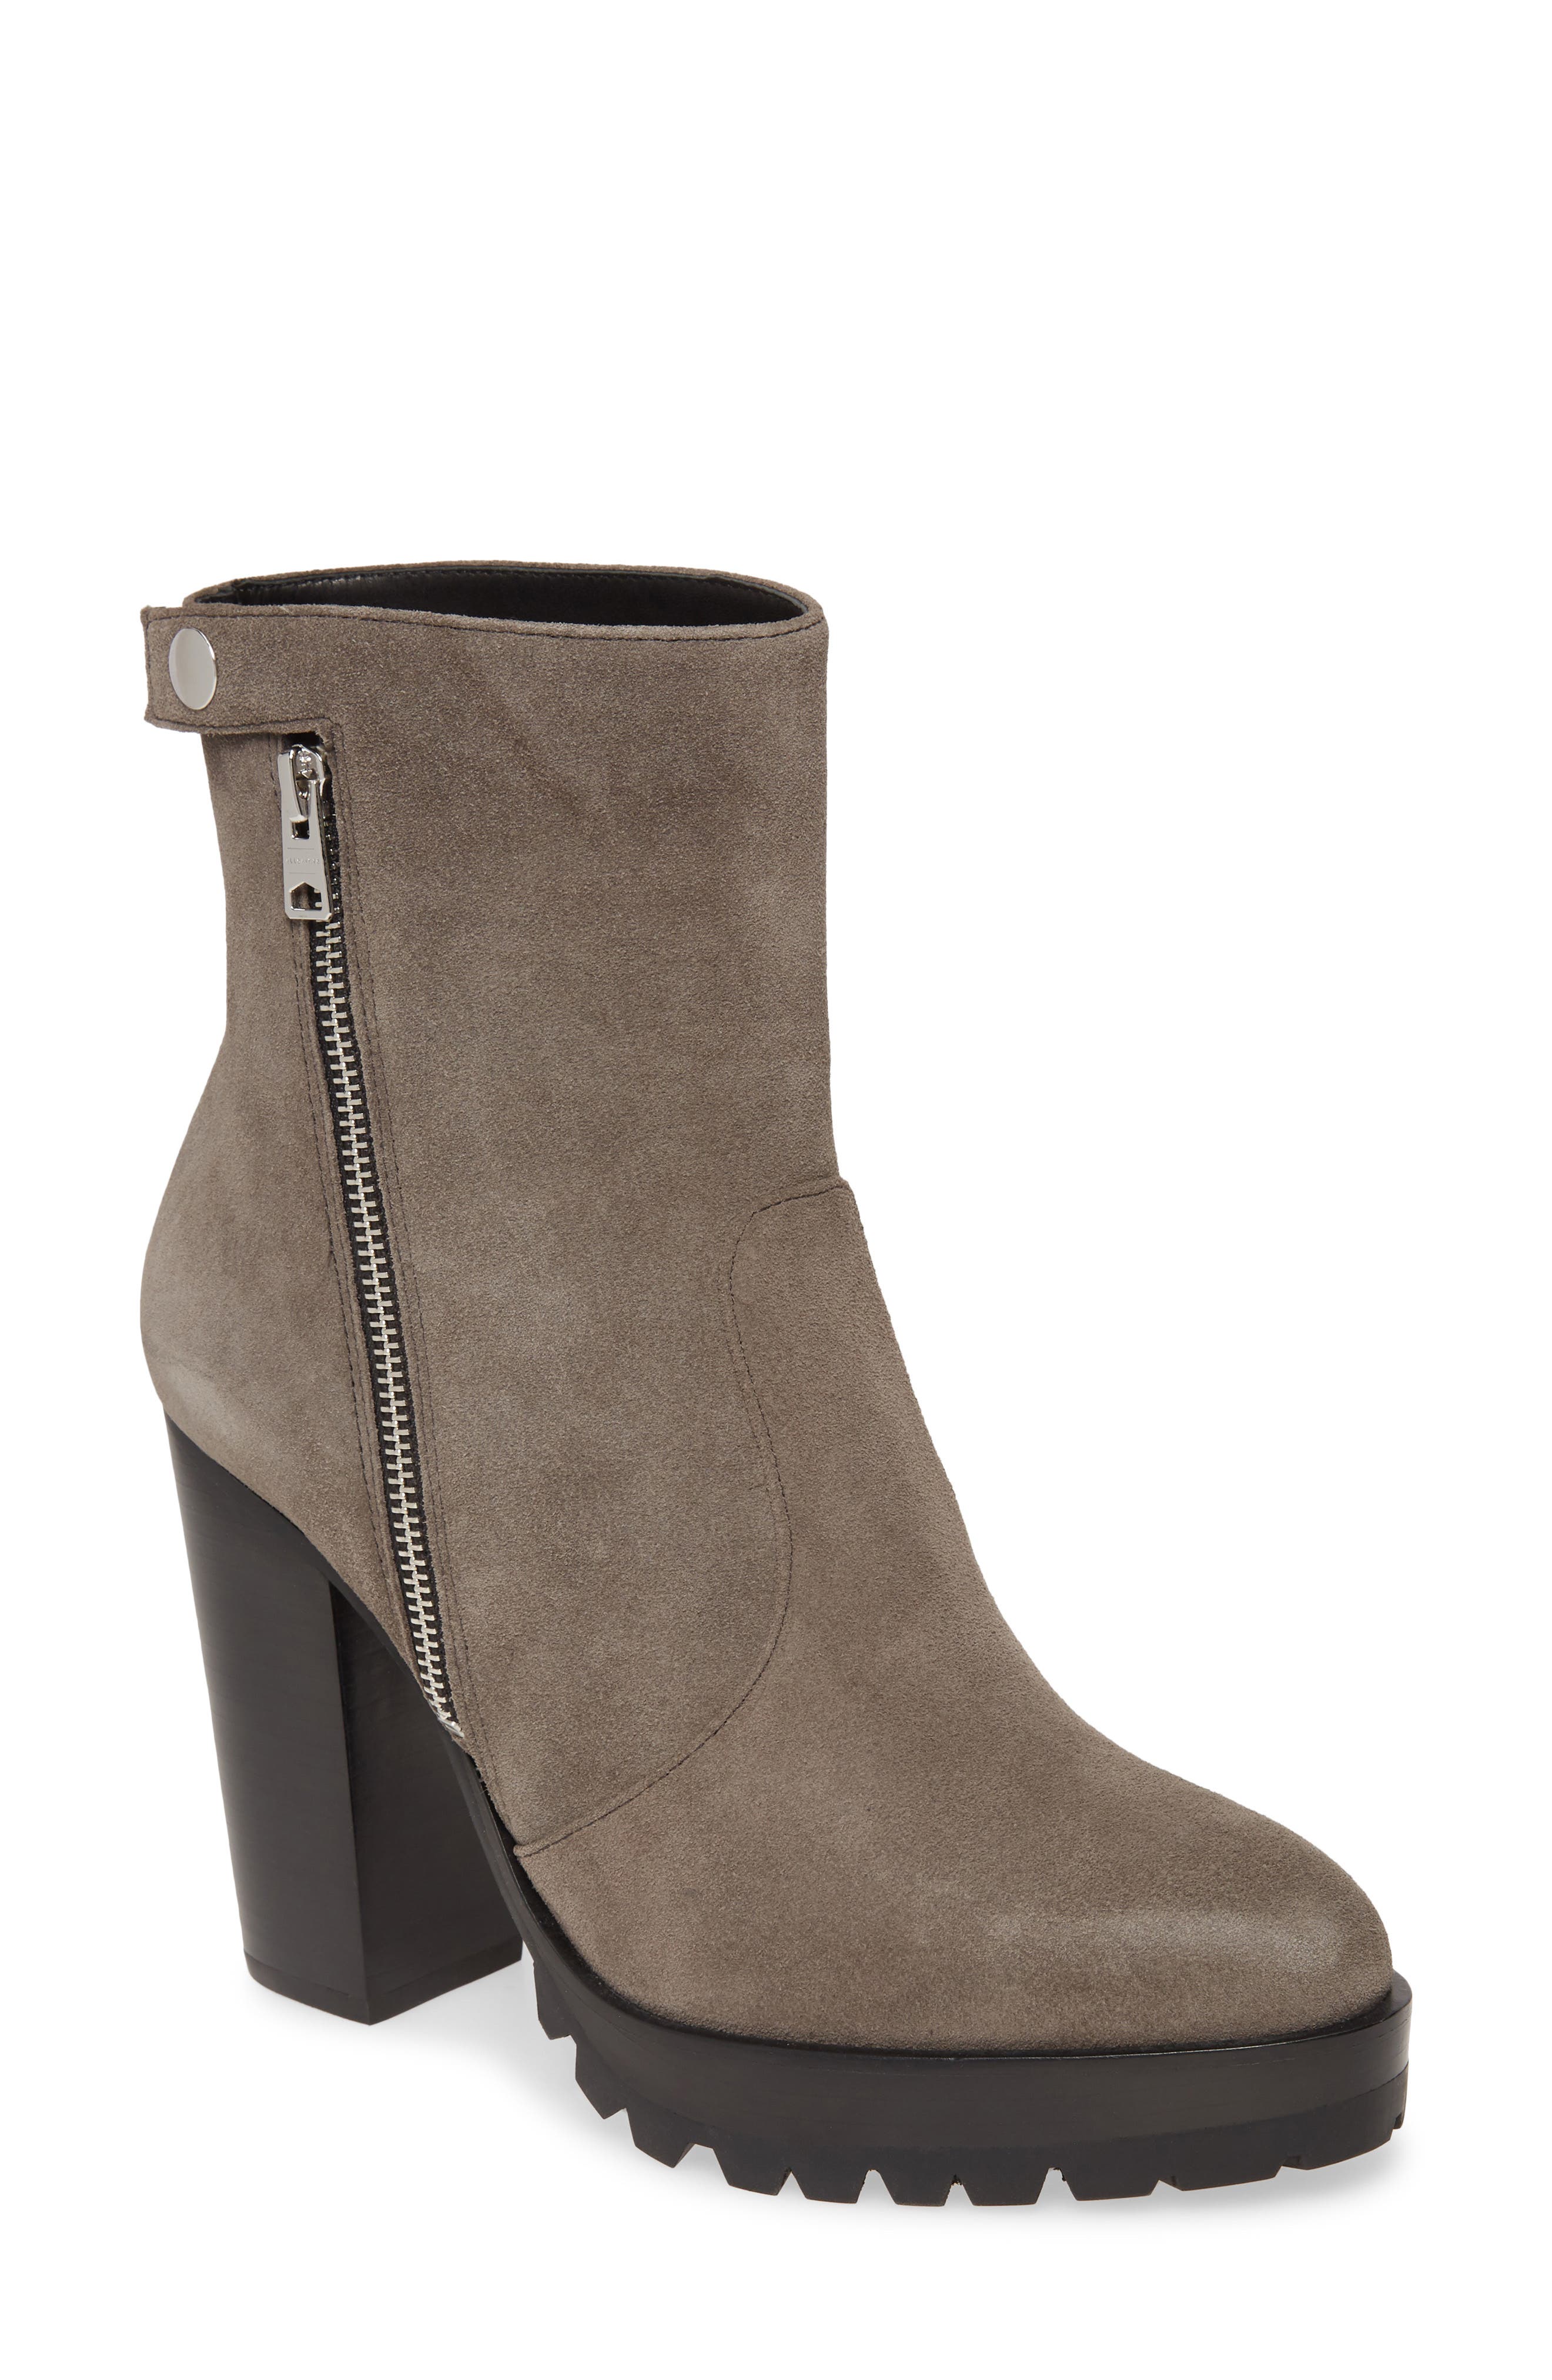 nordstrom rack boots and booties